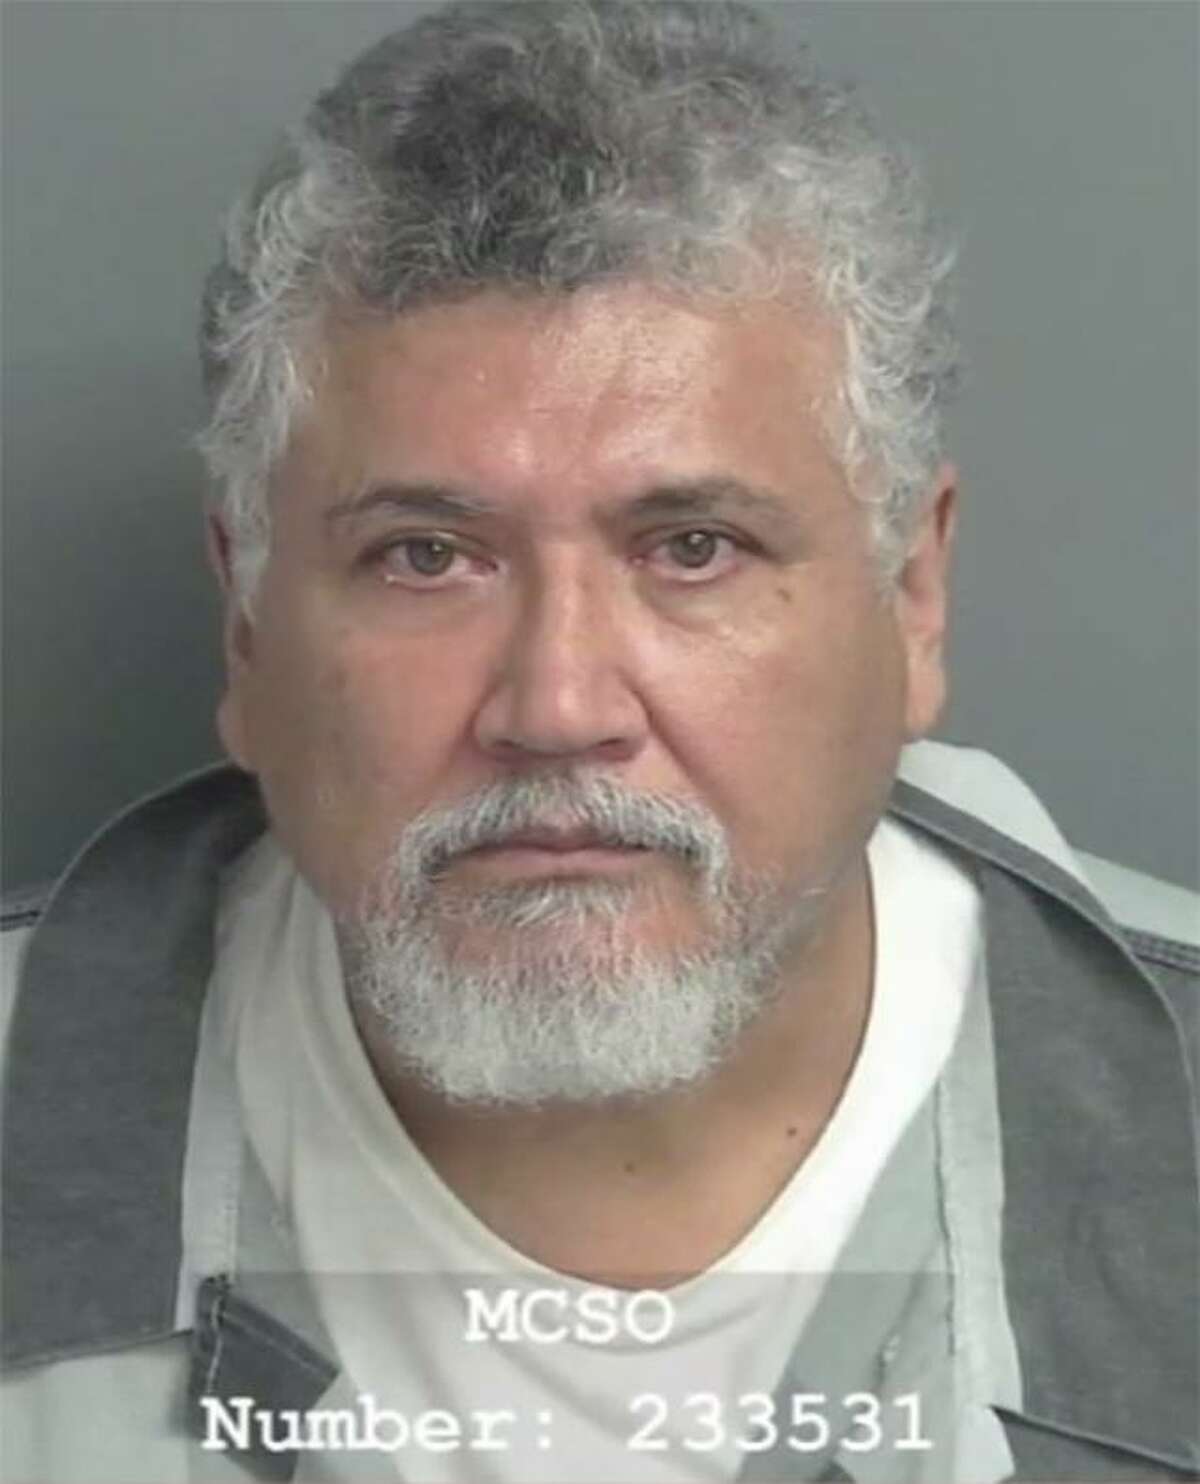 Father Manuel La Rosa-Lopez is accused of sexually abusing children while working at Sacred Heart Catholic Church in Conroe. La Rosa-Lopez is charged with four counts of indecency with a child.